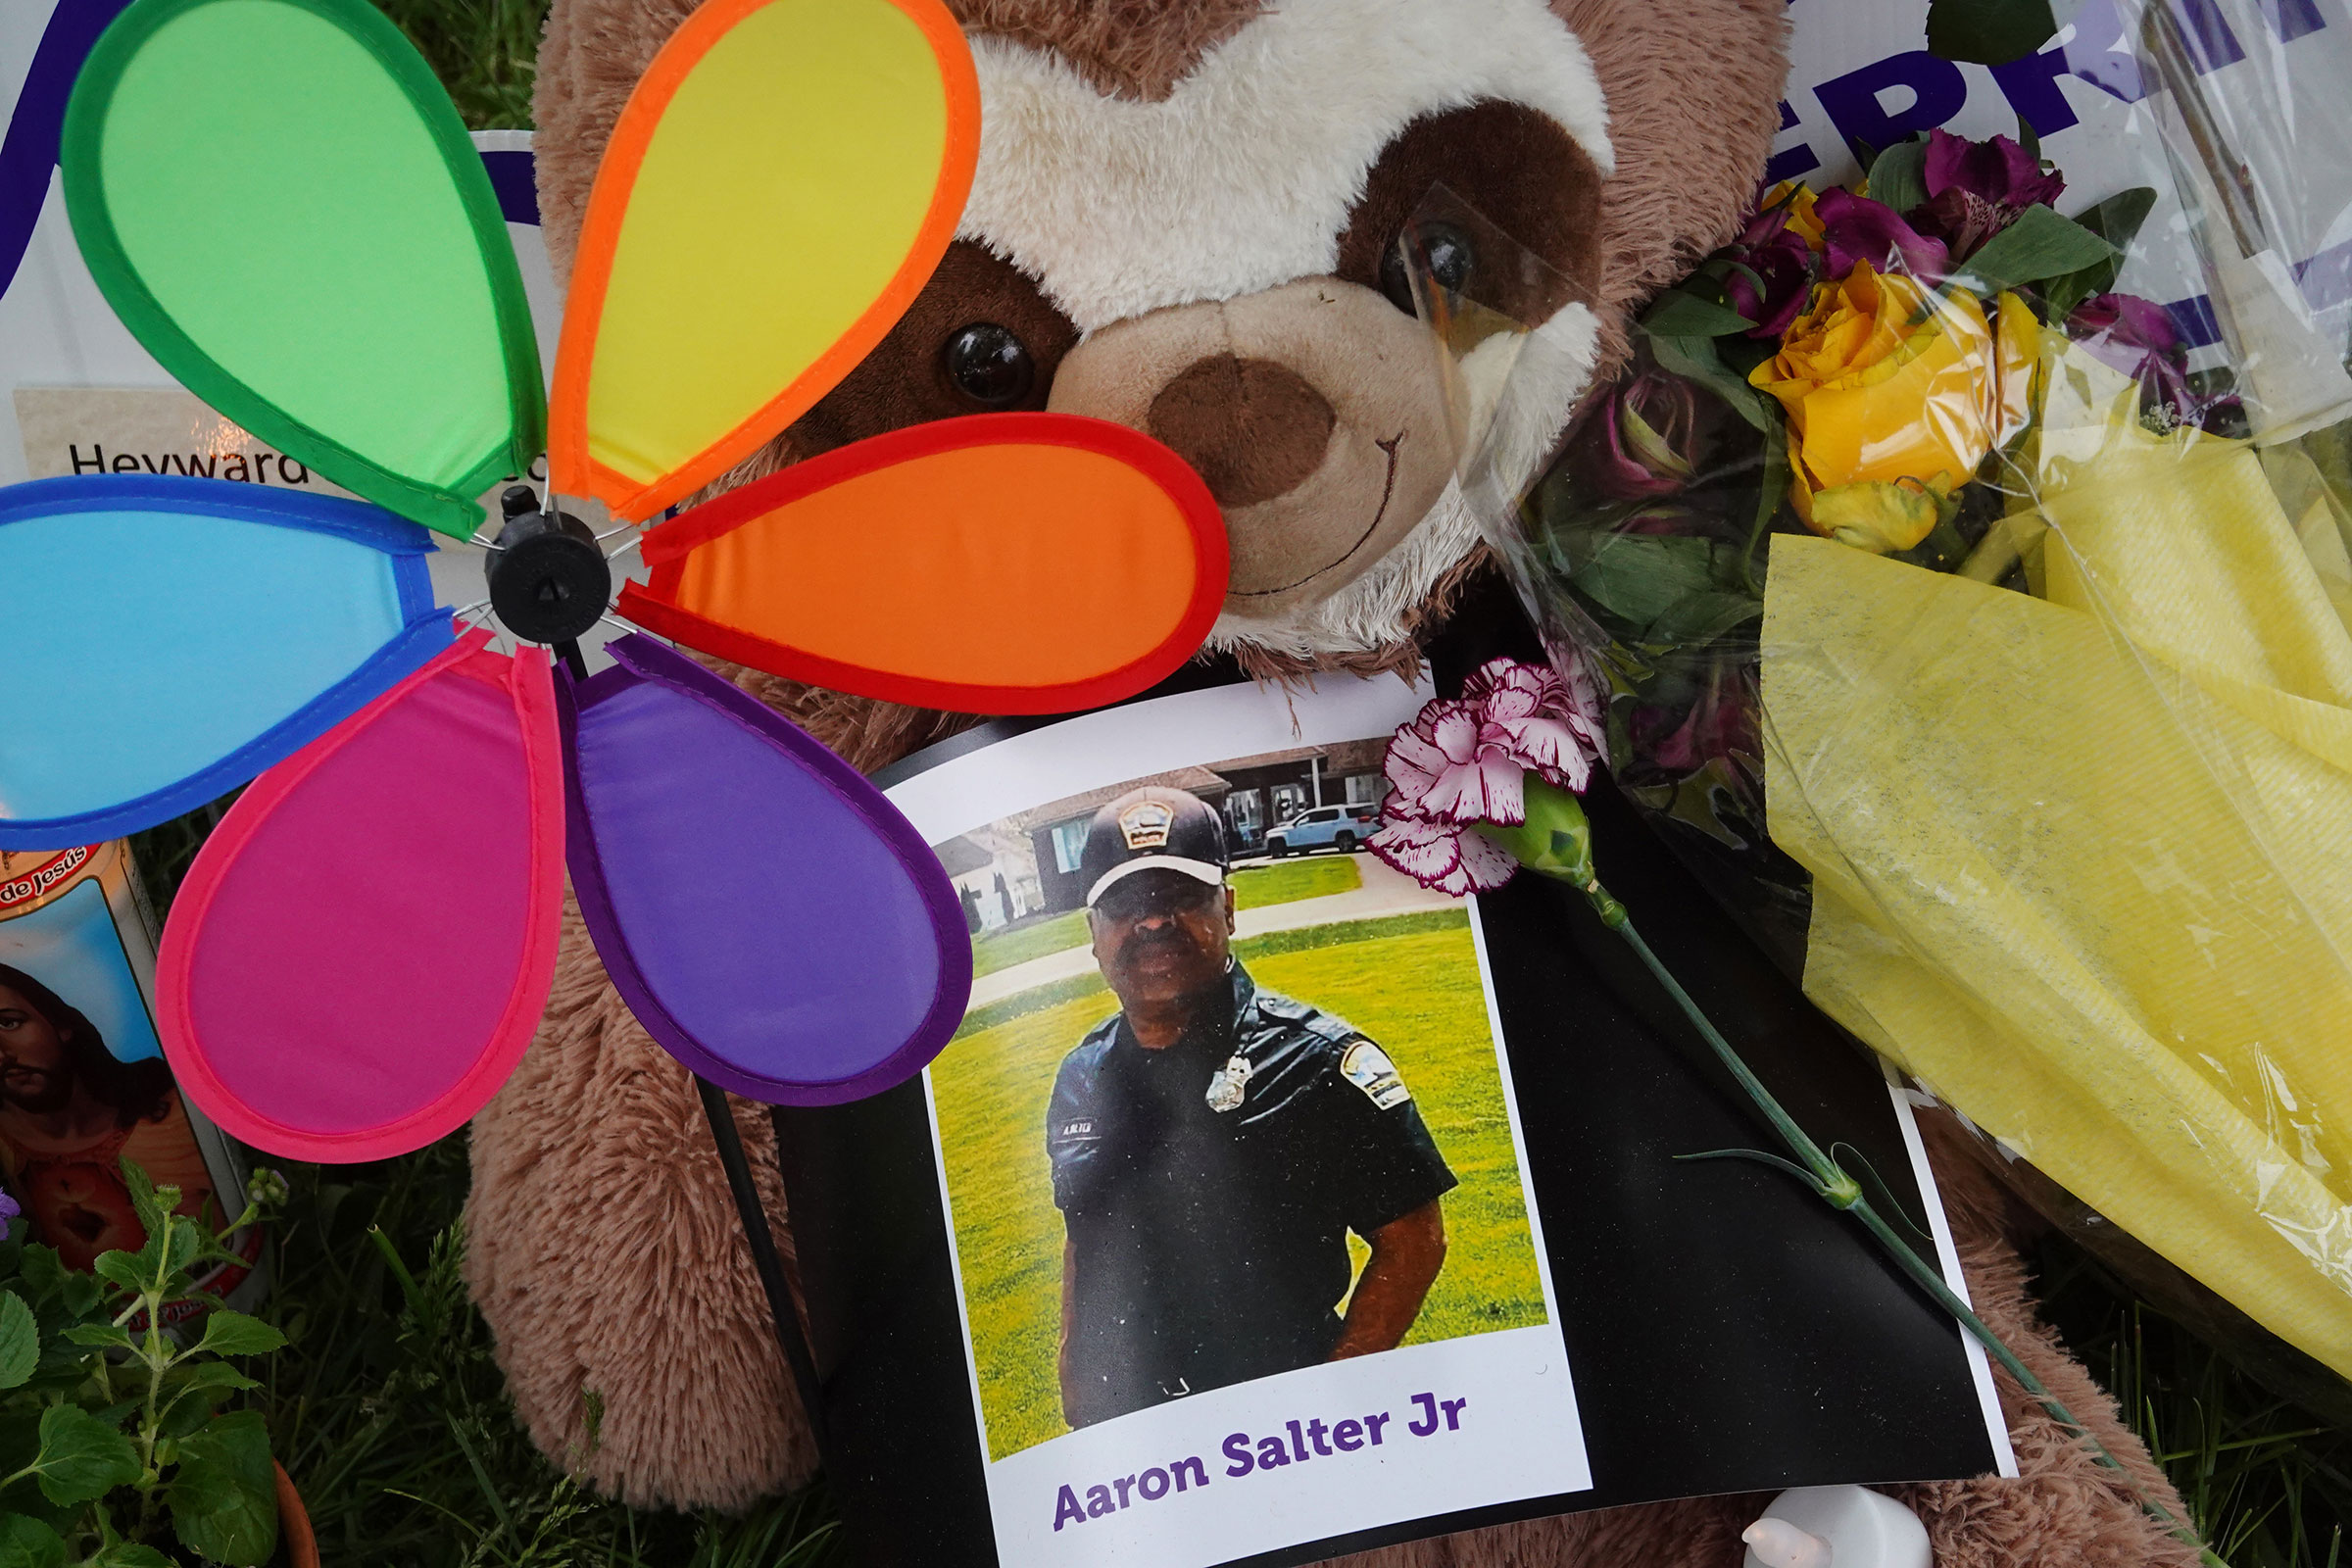 Flowers, candles and mementoes are left in honor of Aaron Salter Jr., the security guard who was shot and killed trying to stop a gunman at the Tops supermarket, at a makeshift memorial outside the store in Buffalo on May 18, 2022. (Scott Olson—Getty Images)